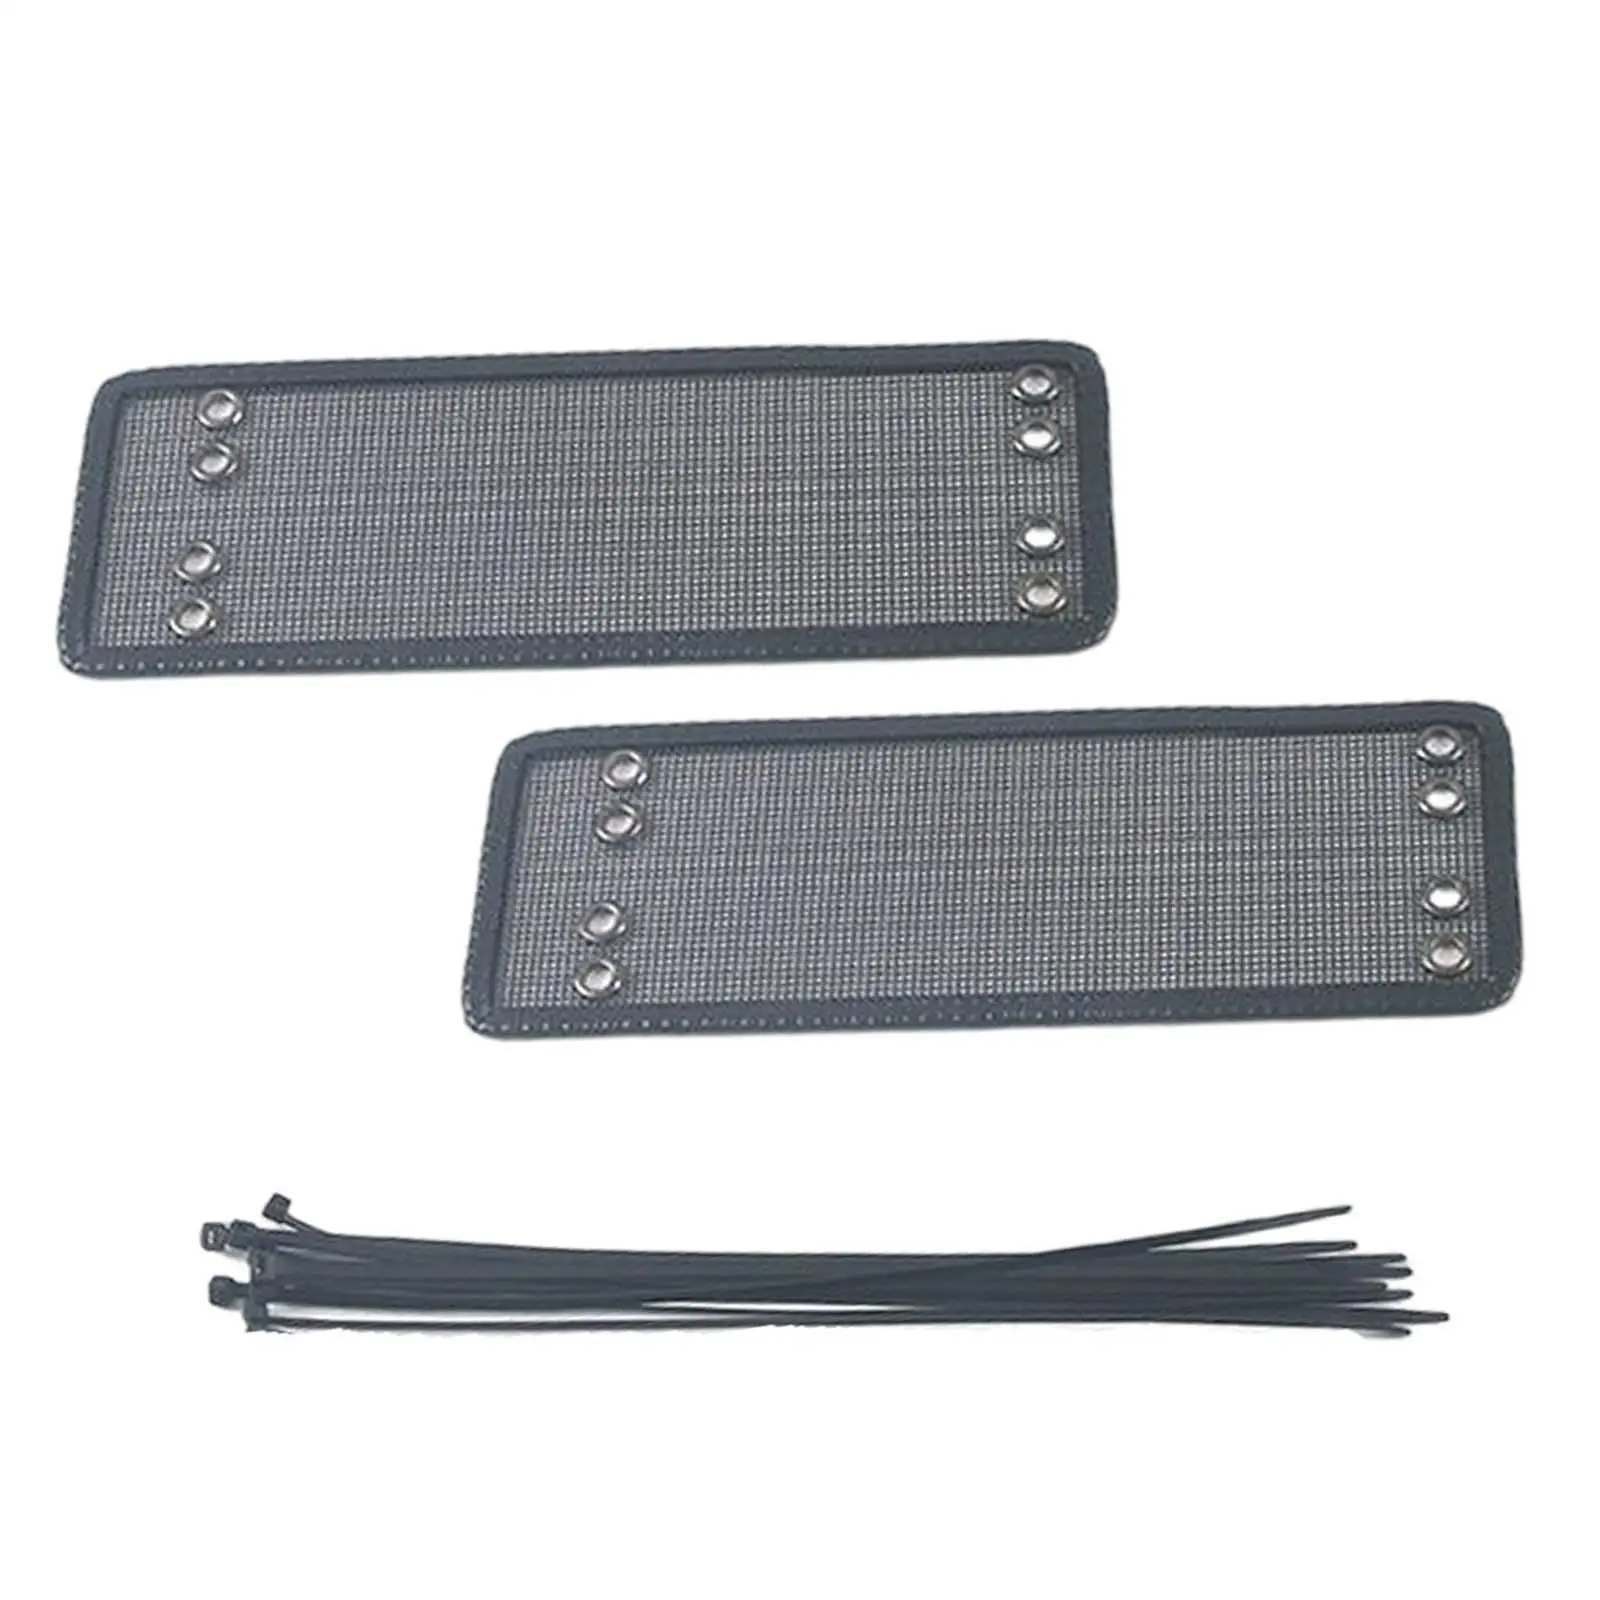 Front Grille Net Cover Exterior Parts Stainless Steel for Byd Atto 3 21 High Performance Accessory Replacement Durable